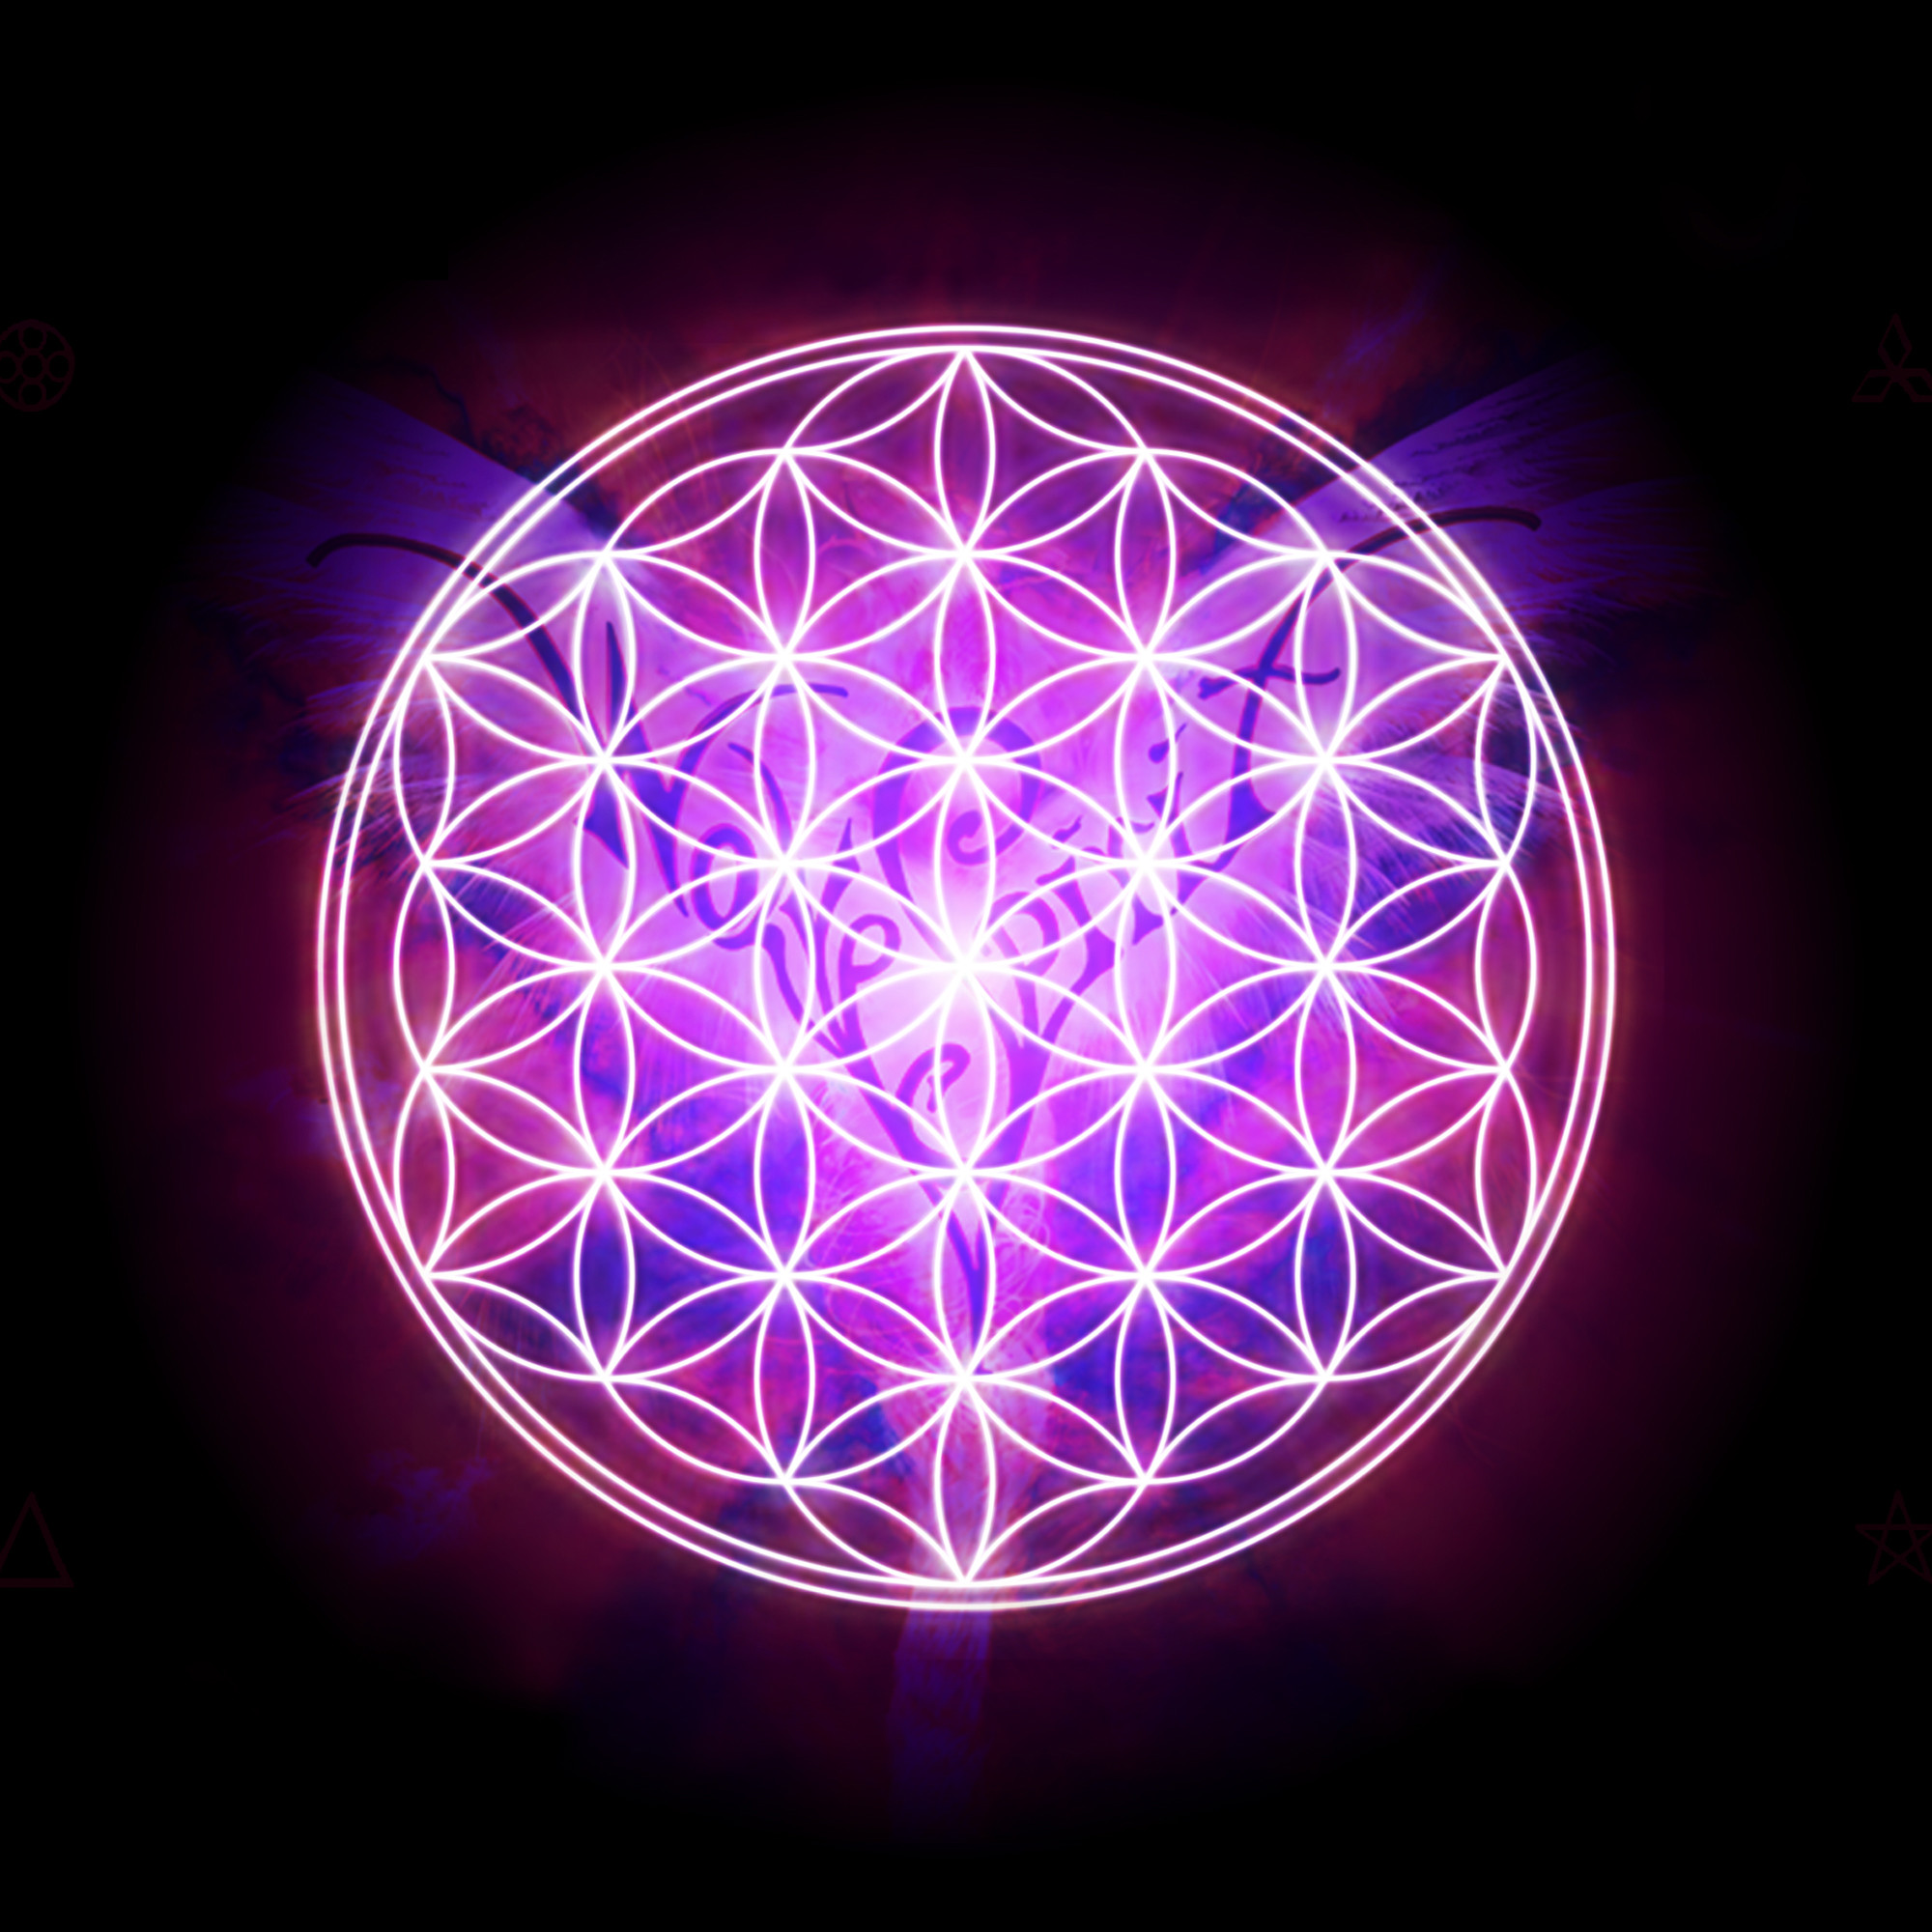 2000x2000 Flower Of Life Wallpaper Flower of life iphone